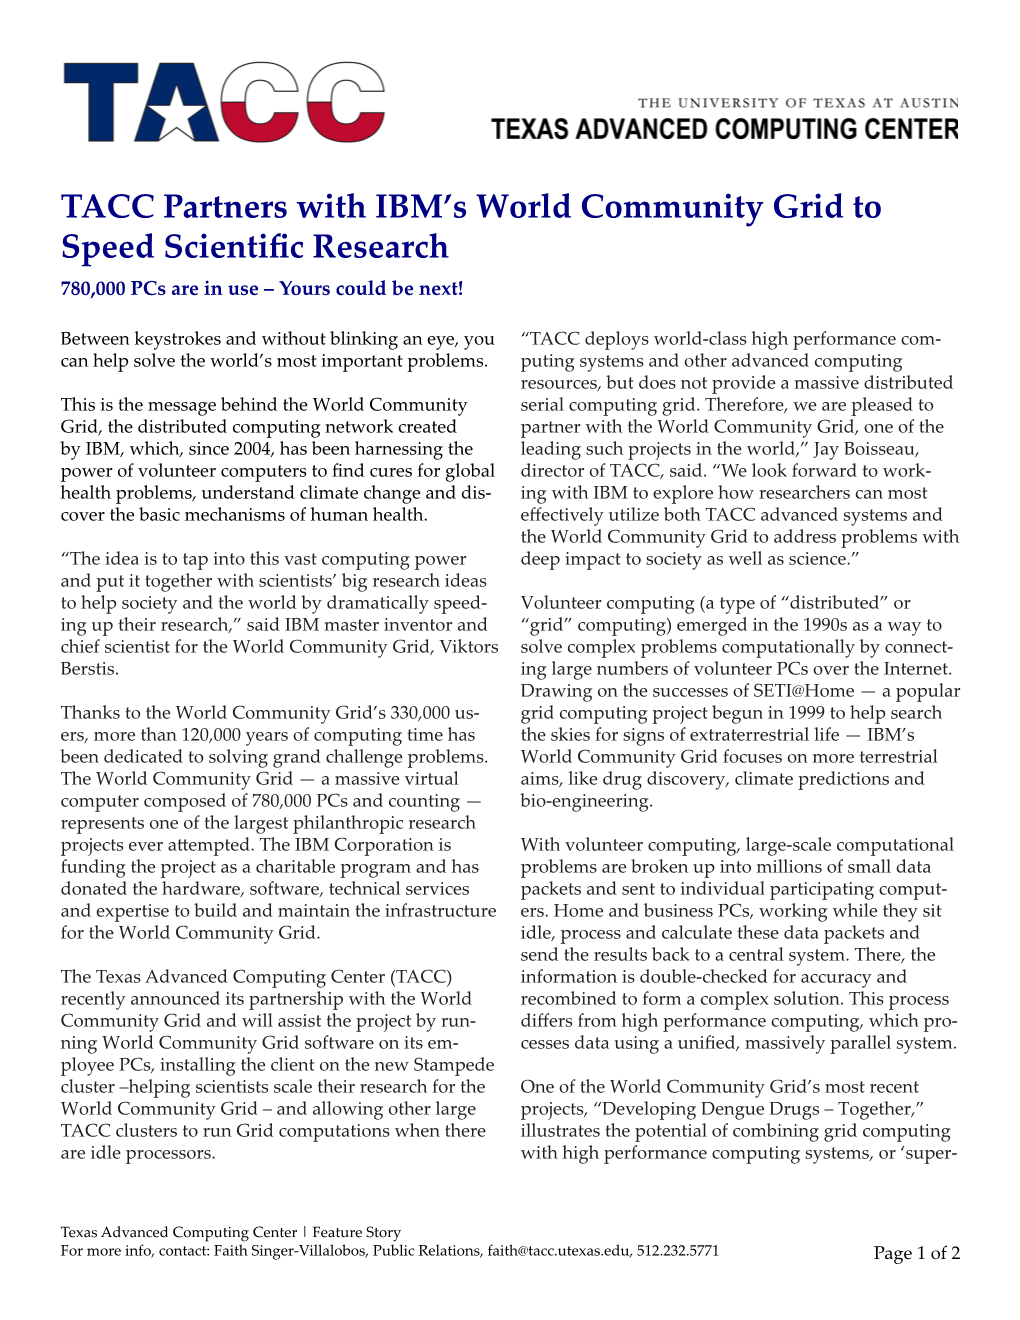 TACC Partners with IBM's World Community Grid to Speed Scientific